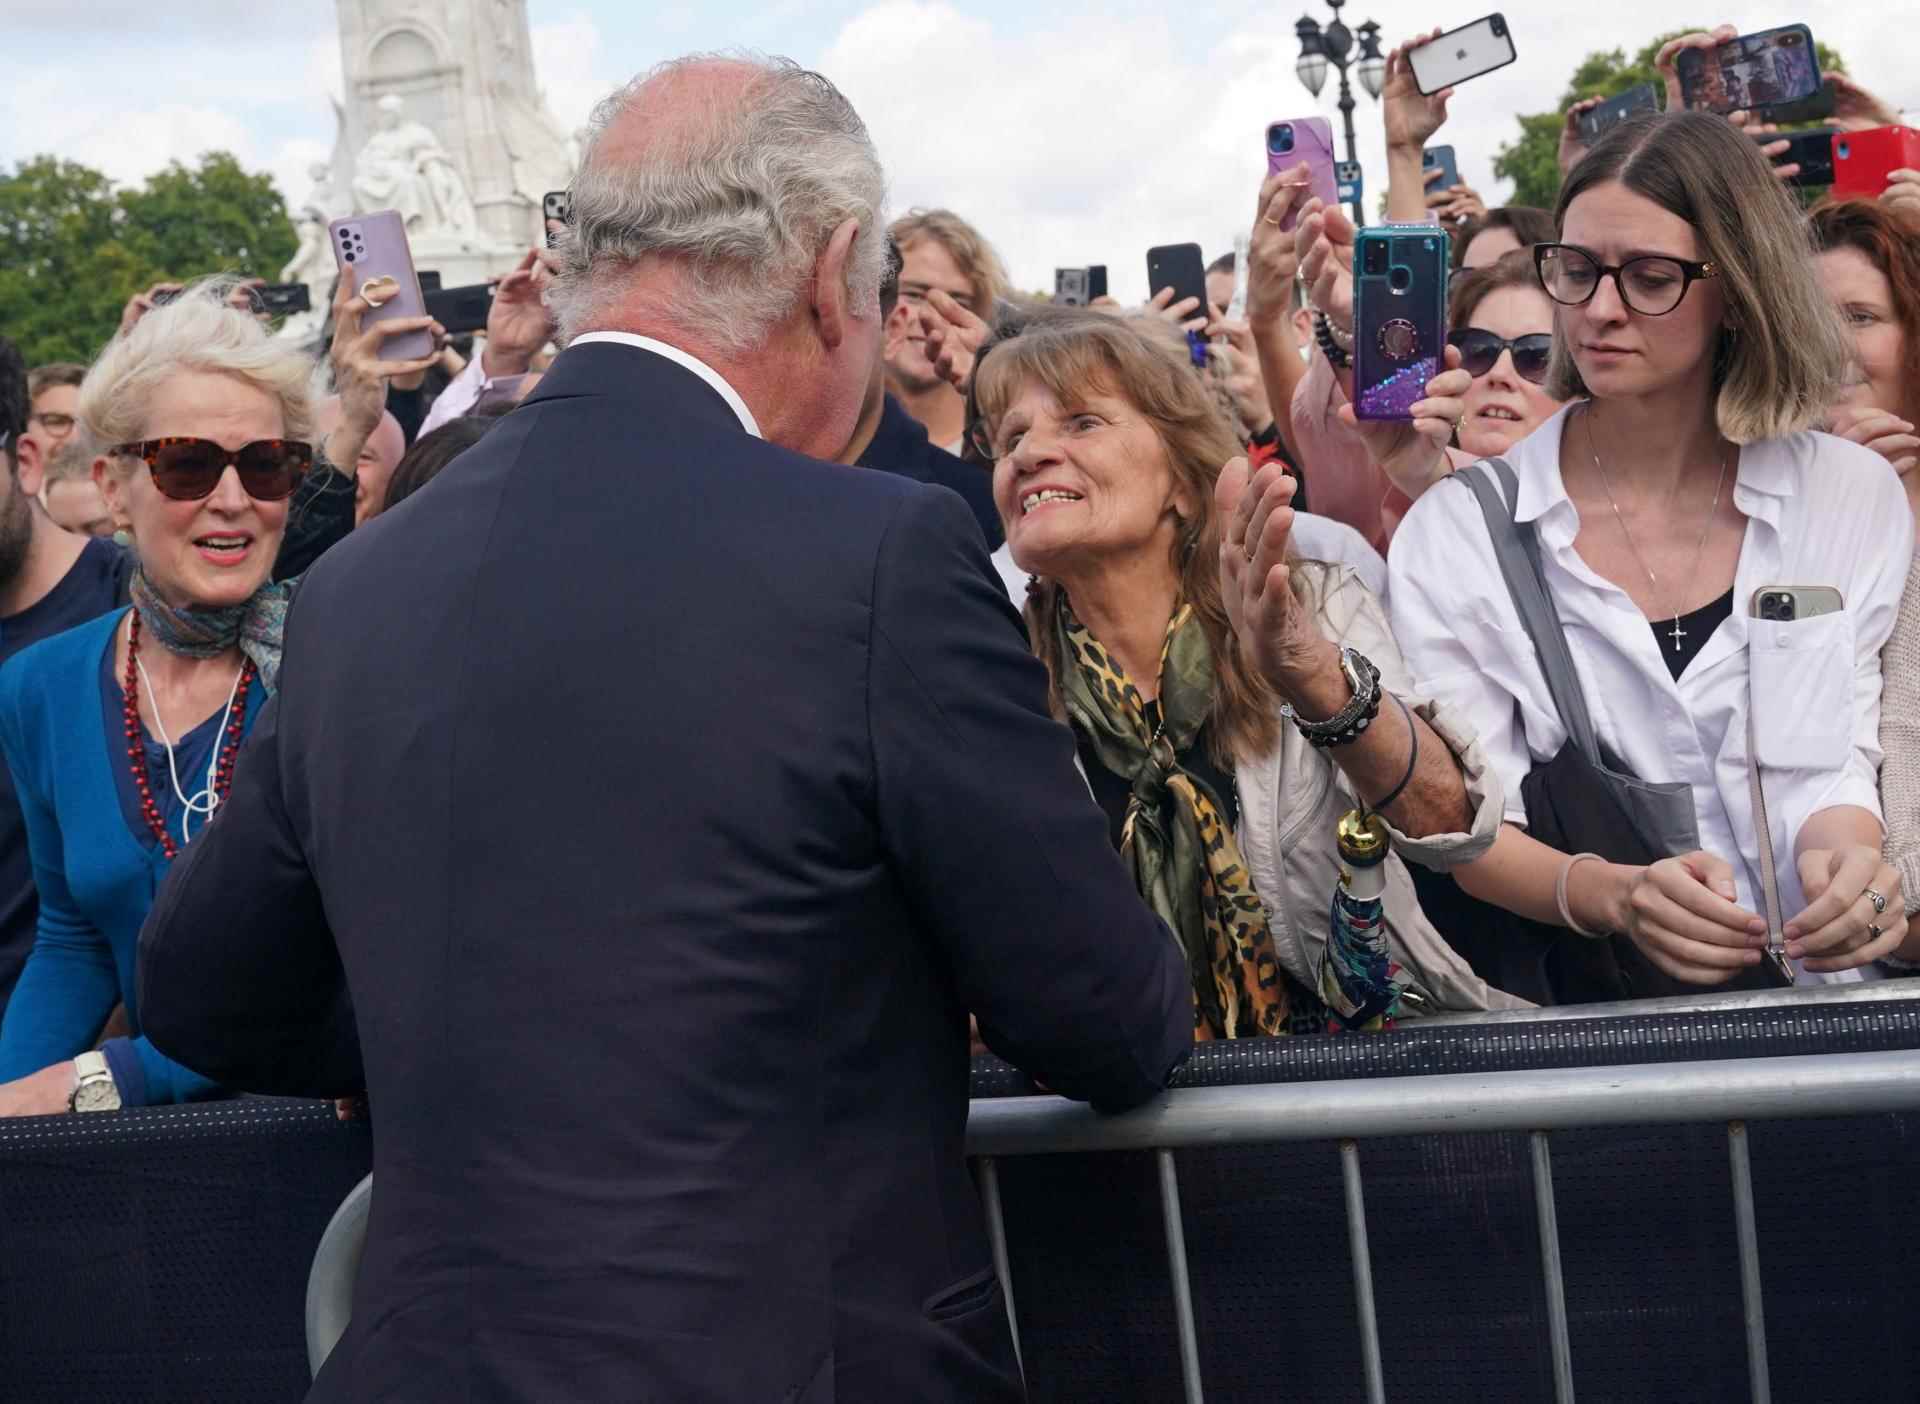   Charles III greets the crowd for a moment in front of Buckingham Palace in London on September 9, 2022.